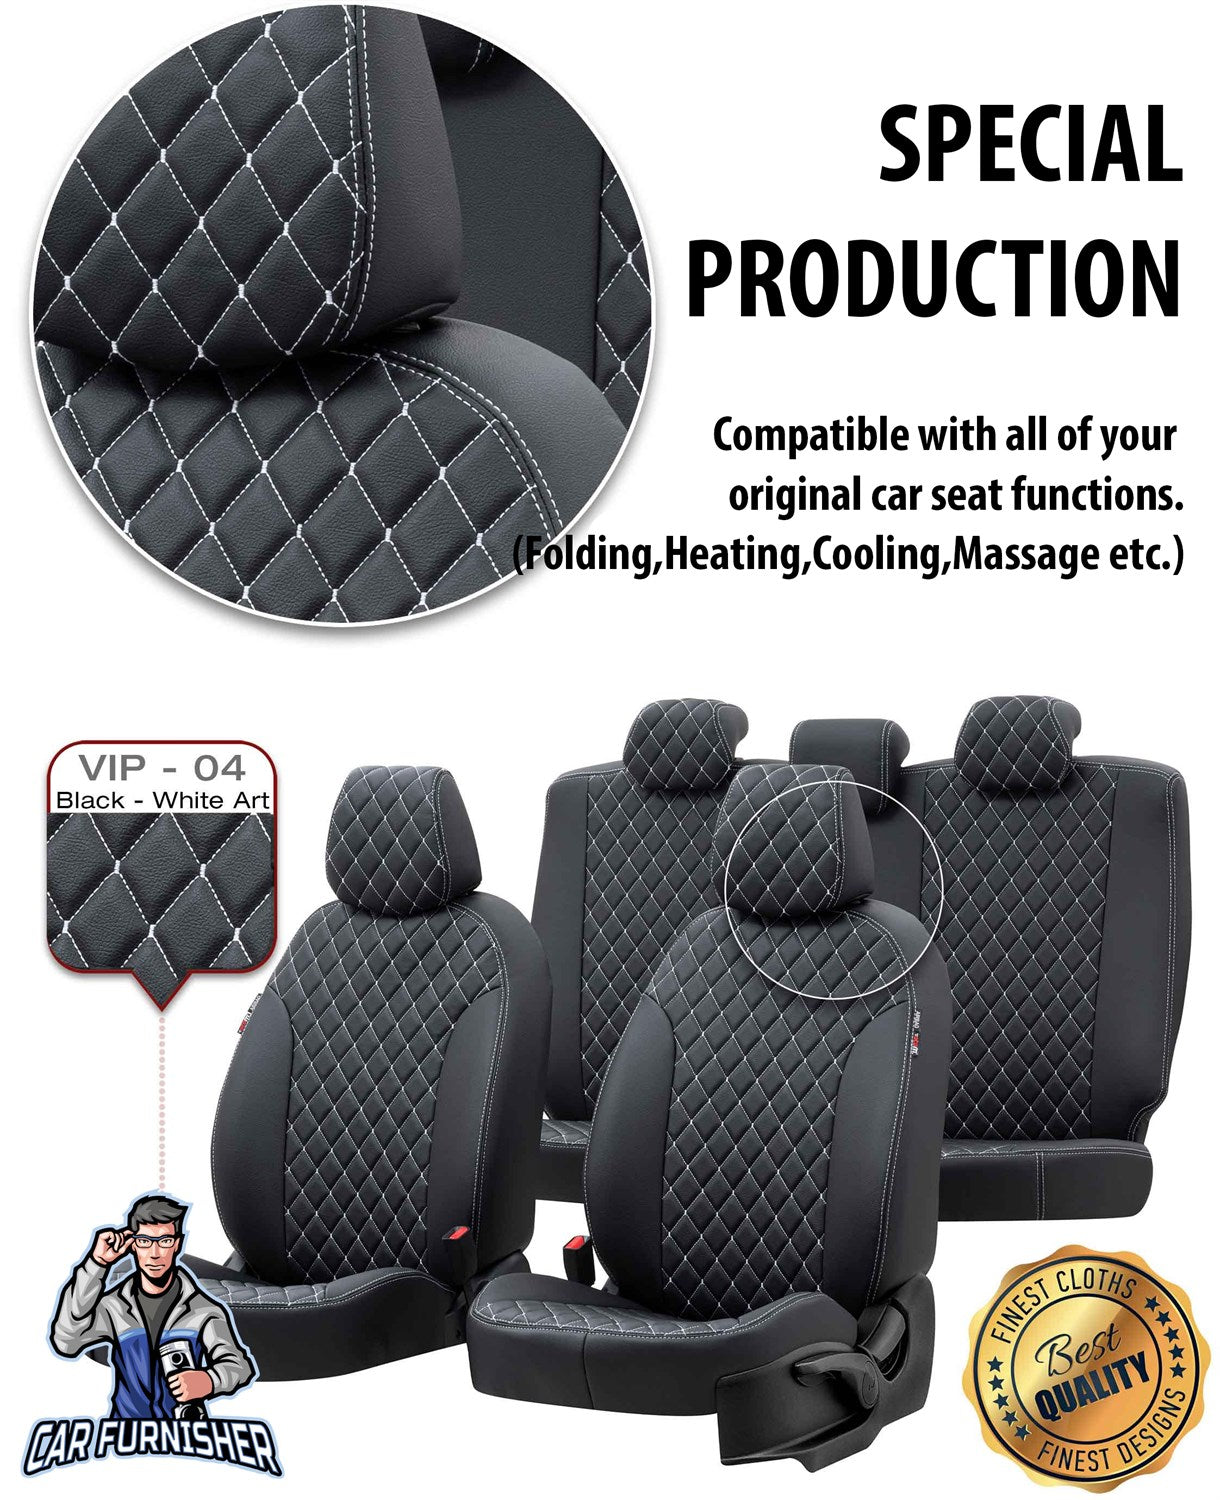 Volkswagen Polo Seat Cover Madrid Leather Design Smoked Leather